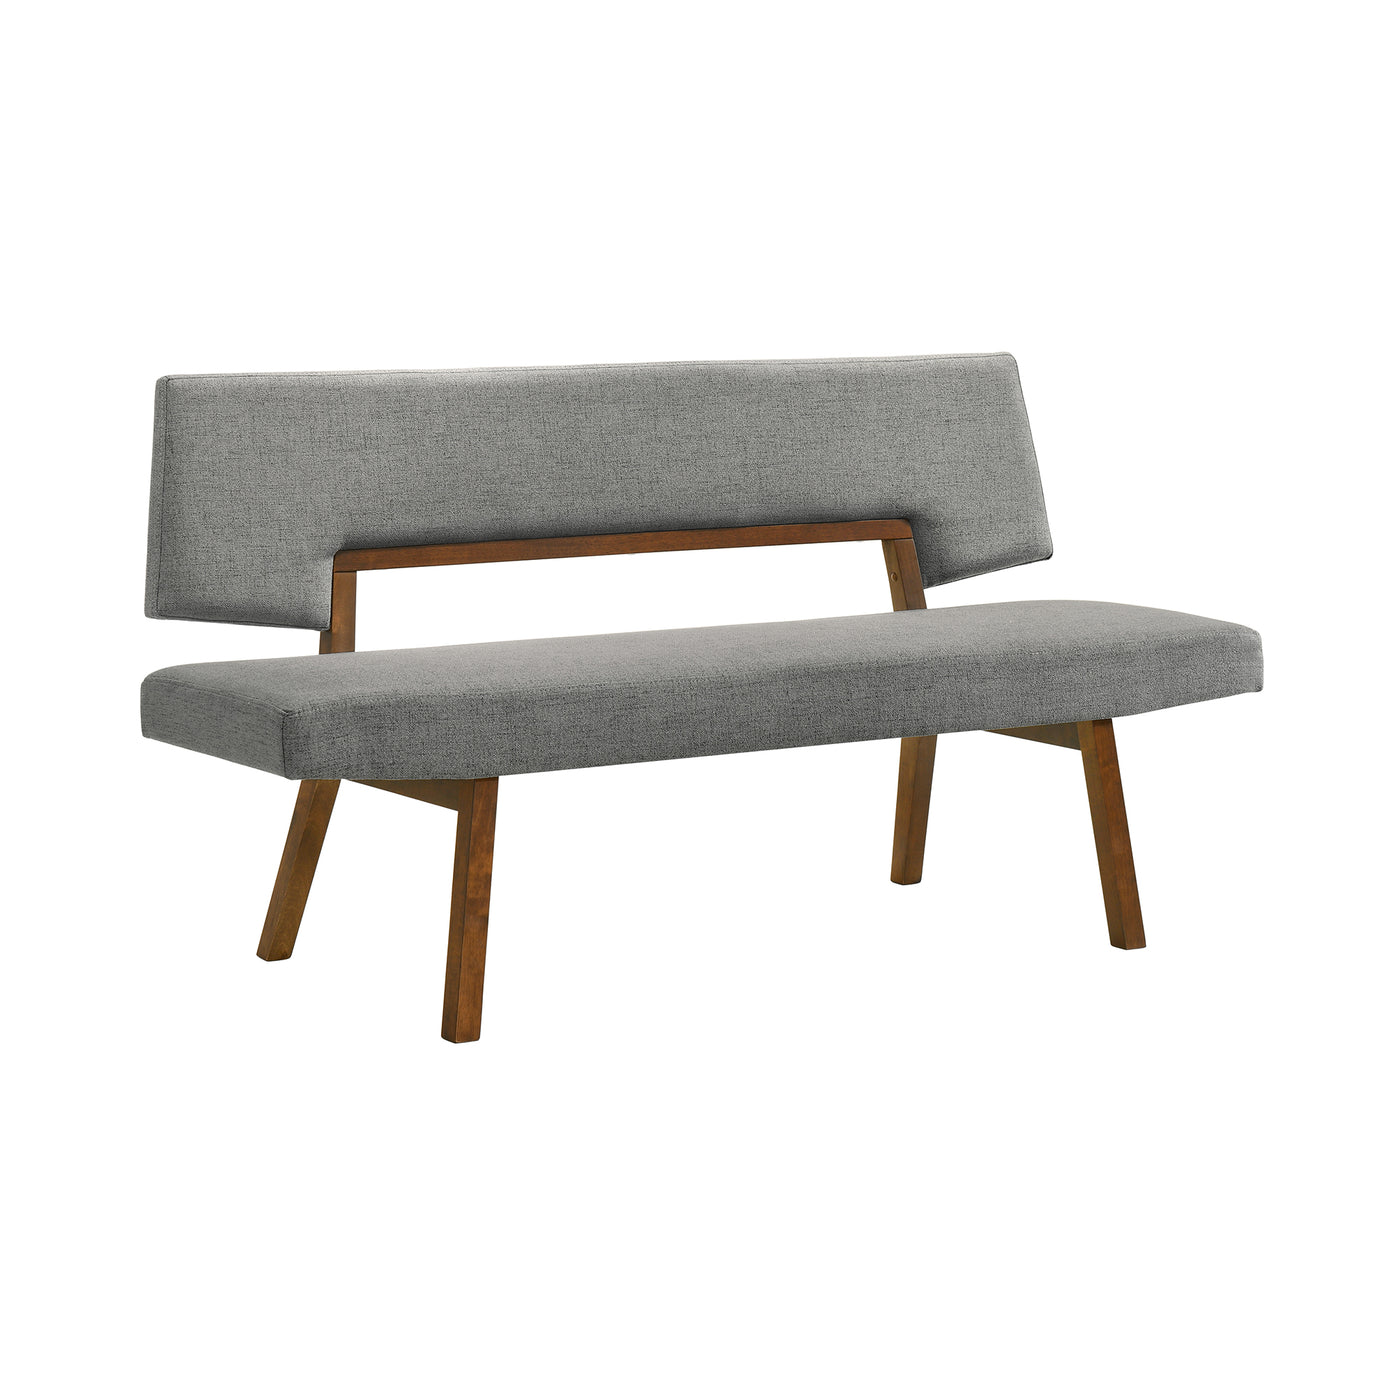 Channell Upholstered Wood Dining Bench